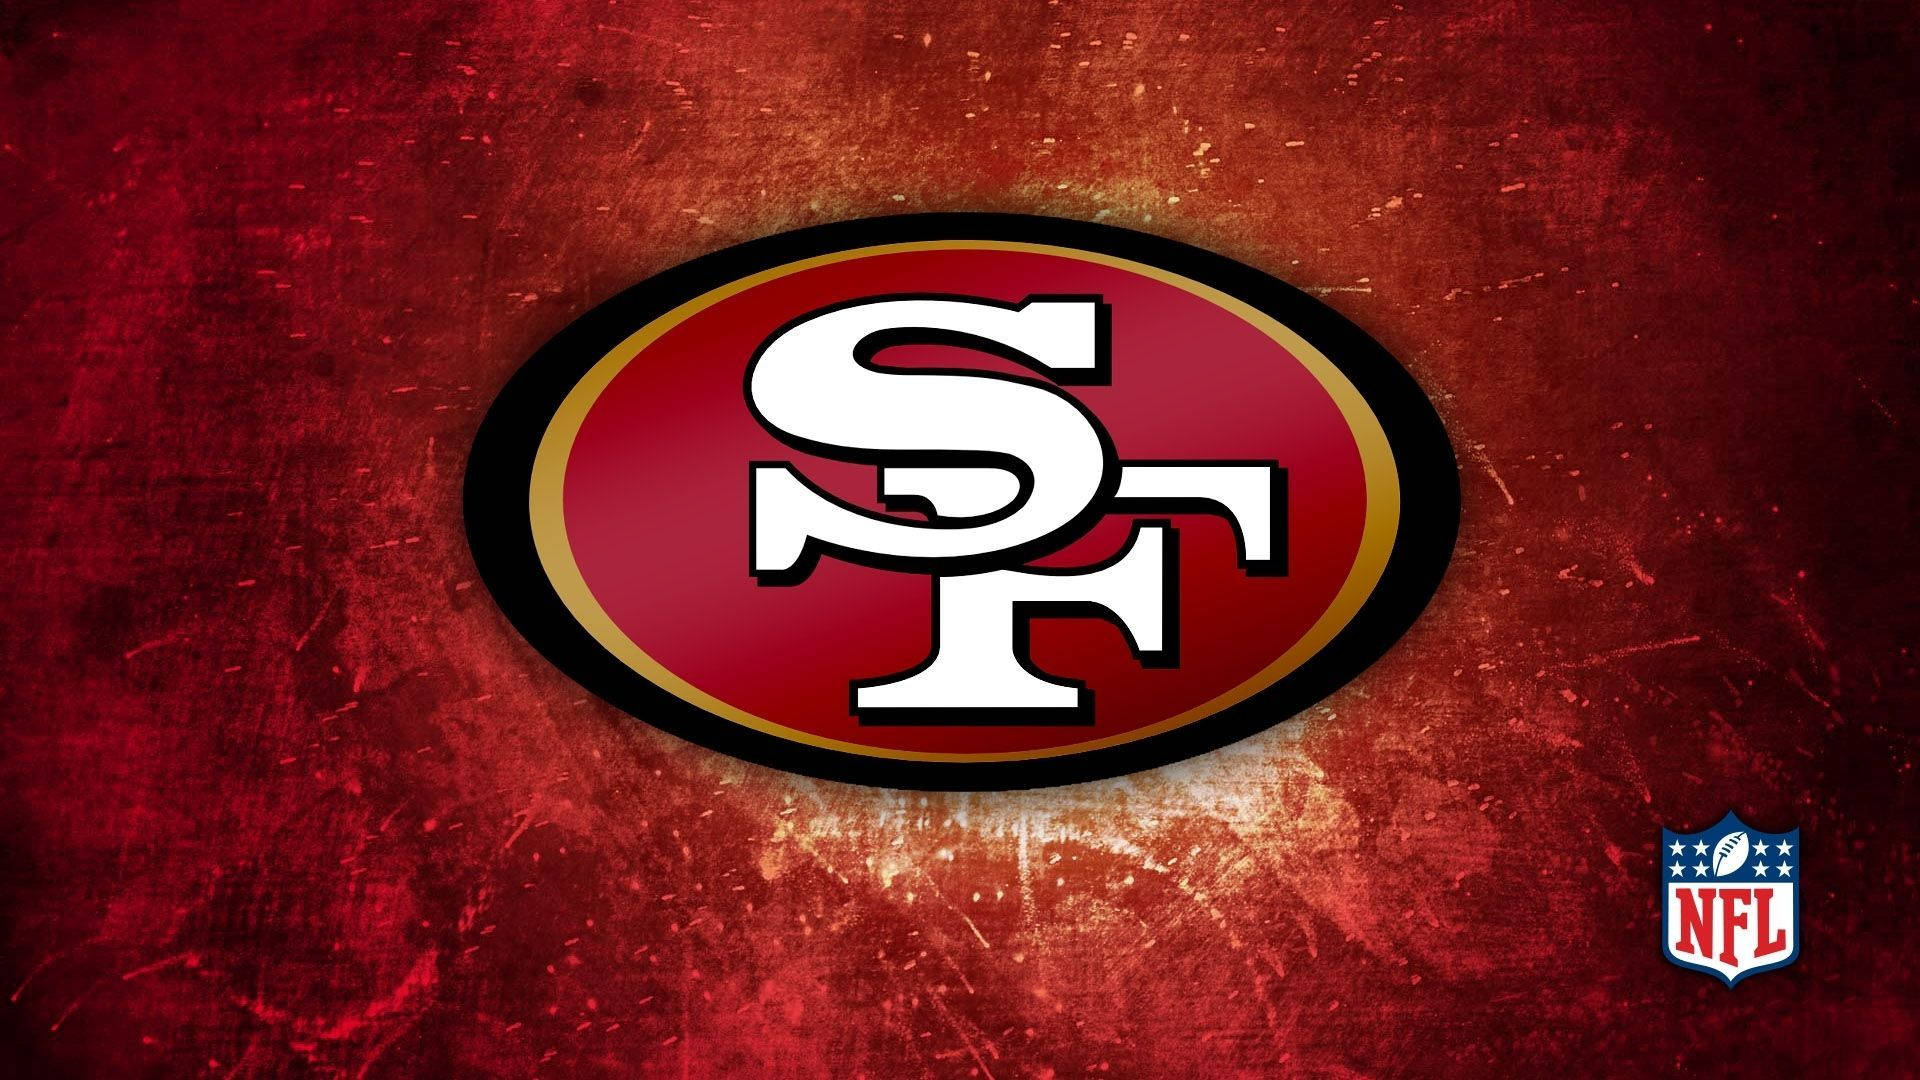 Representing the City with Pride: The SF 49ers Logo Wallpaper